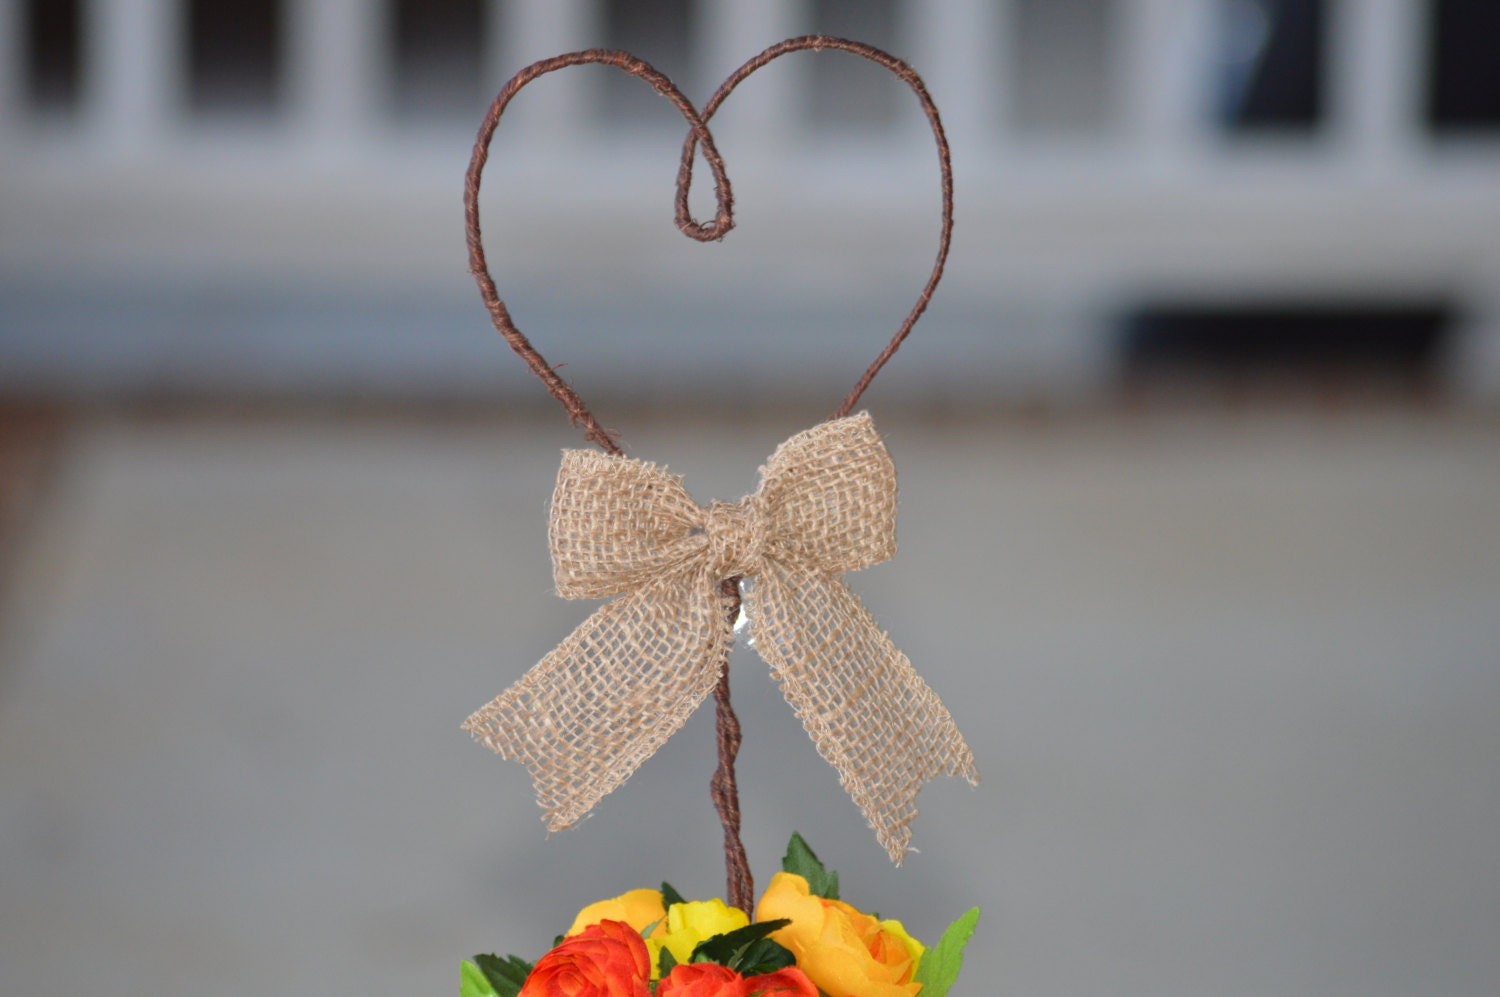 Rustic heart cake topper, wire burlap heart cake topper, country wedding